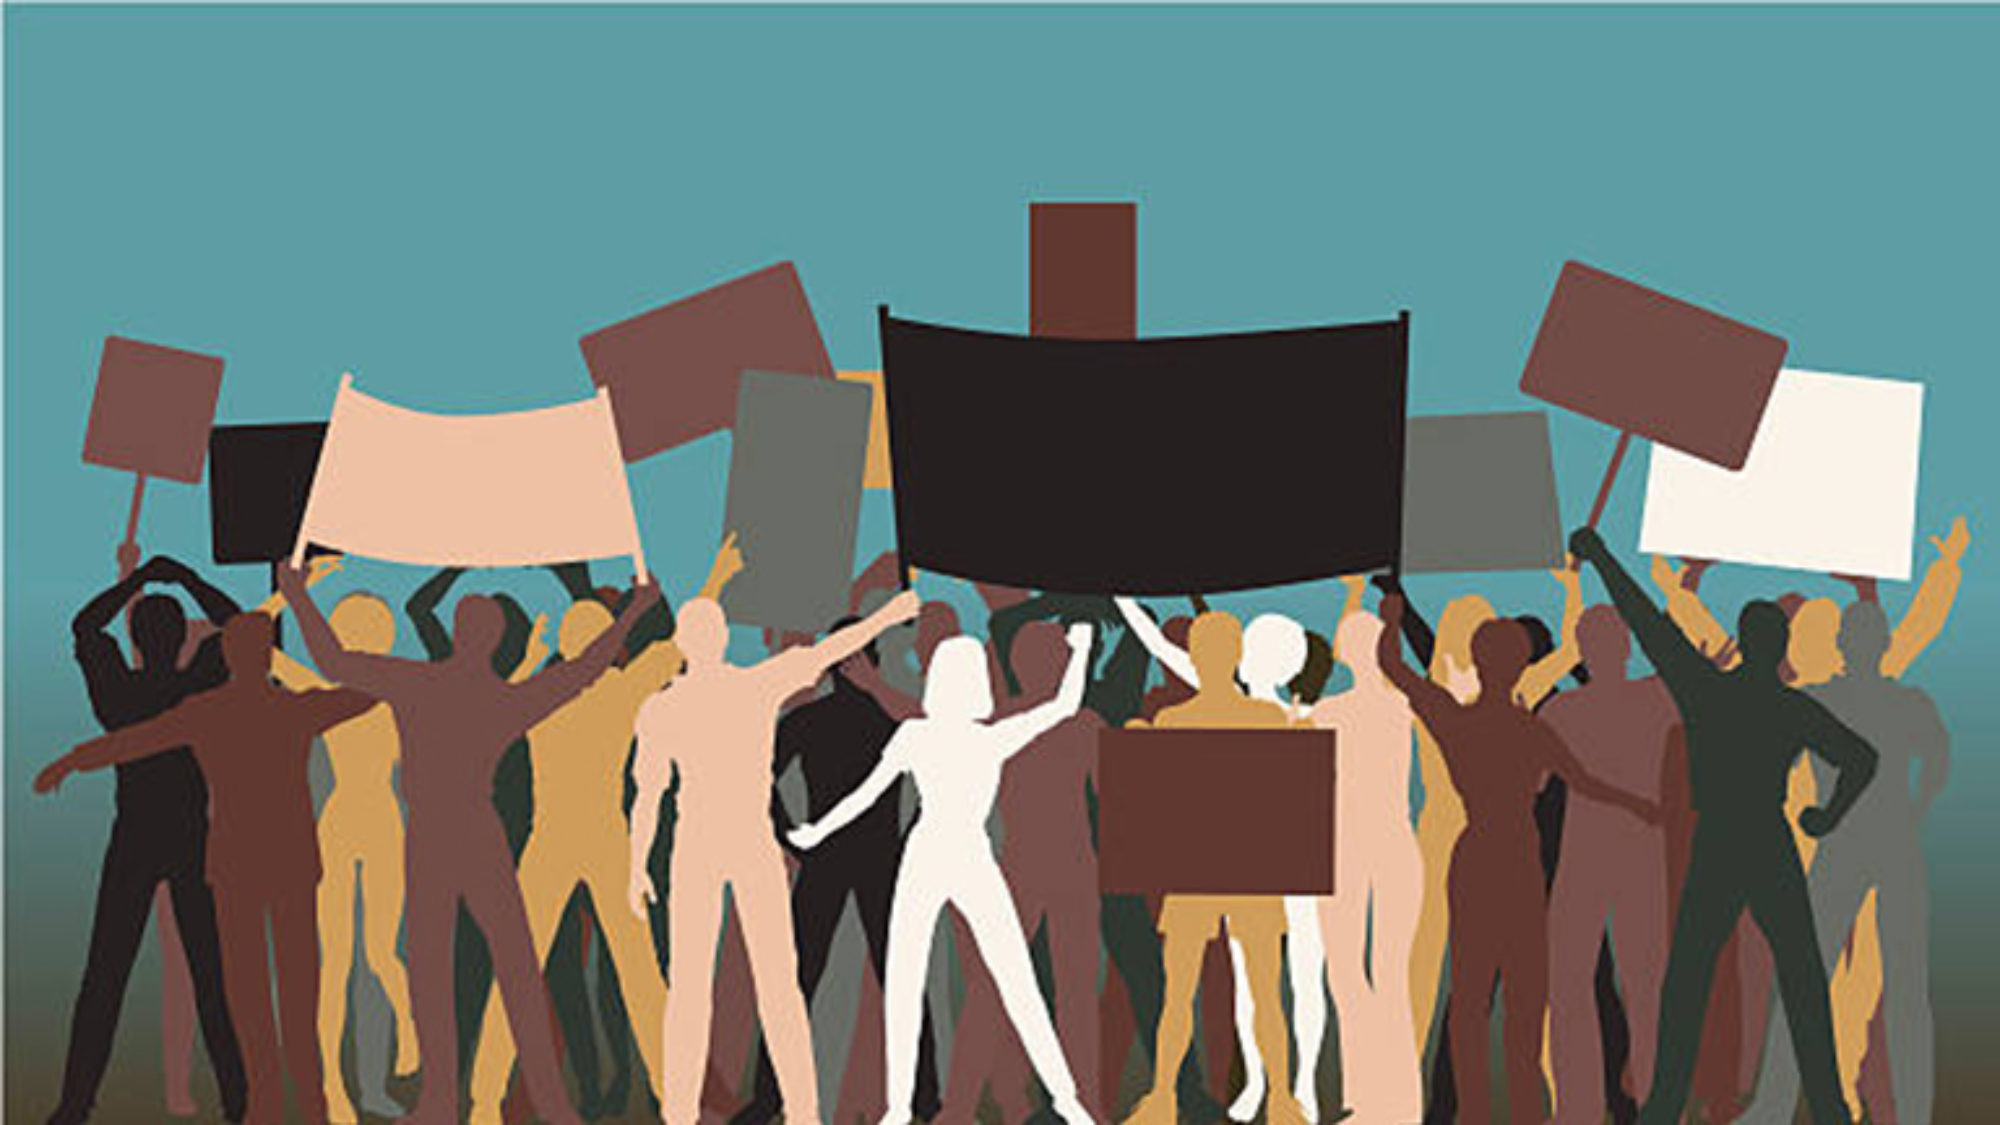 Illustration of people holding up signs